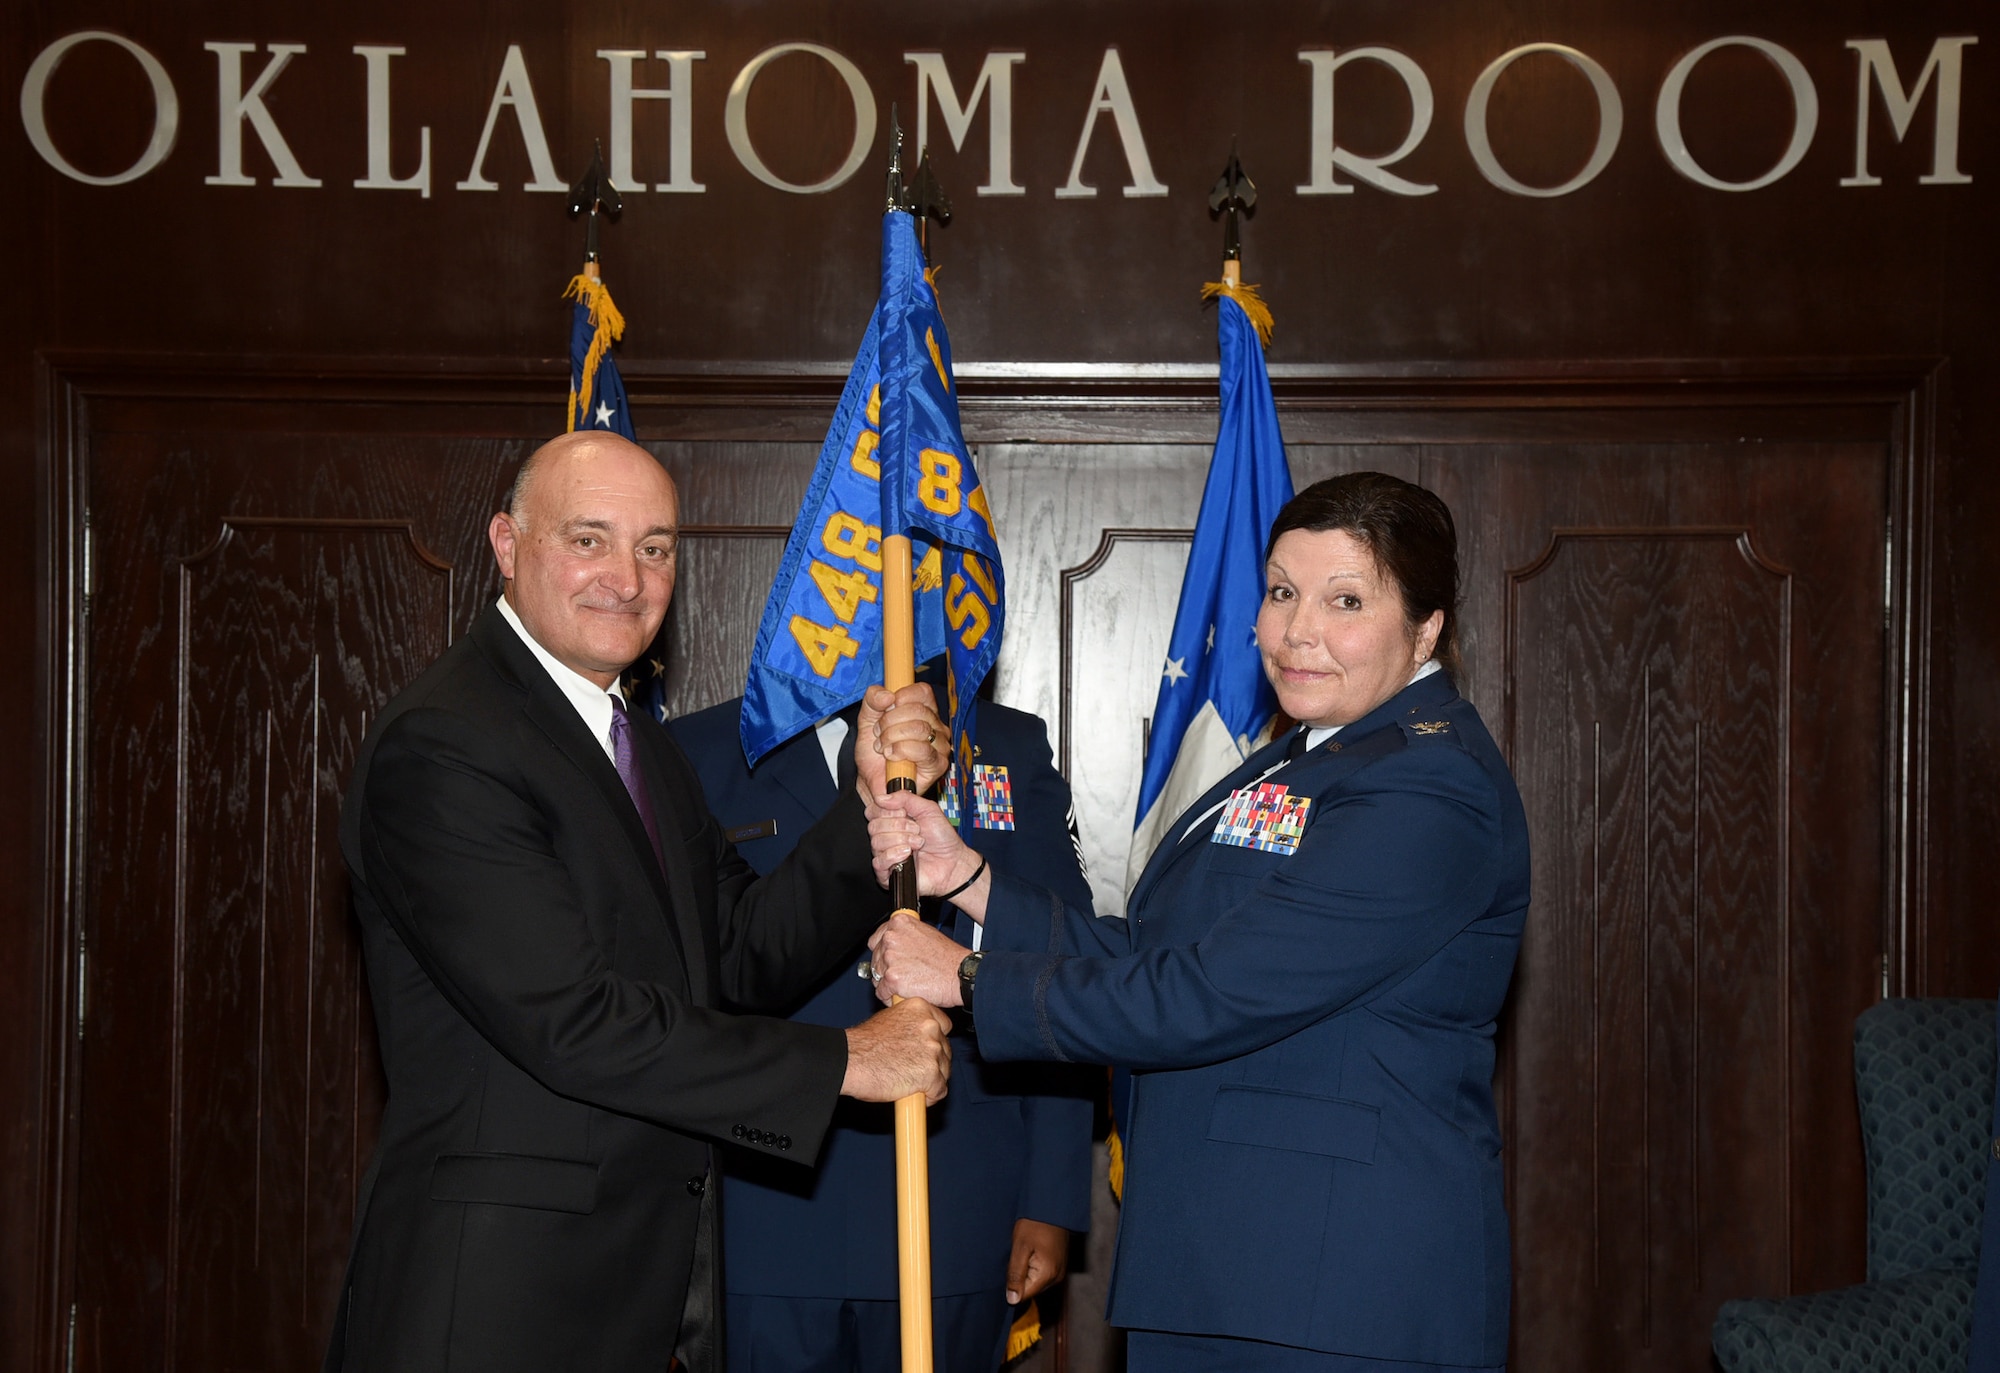 Col. Michelle Hall accepted command of the 848th Supply Chain Management Group in a ceremony in the Oklahoma Room of Bldg. 3001 July 11. Dennis D'Angelo, director of the 448th Supply Chain Management Wing, presided over the ceremony in which Col. Robert Kielty relinquished command of the group. Hall will command four squadrons with over 700 personnel who provide sustainment of 32 major weapon systems and over 12,000 engines. (U.S. Air Force photo/Kelly White)